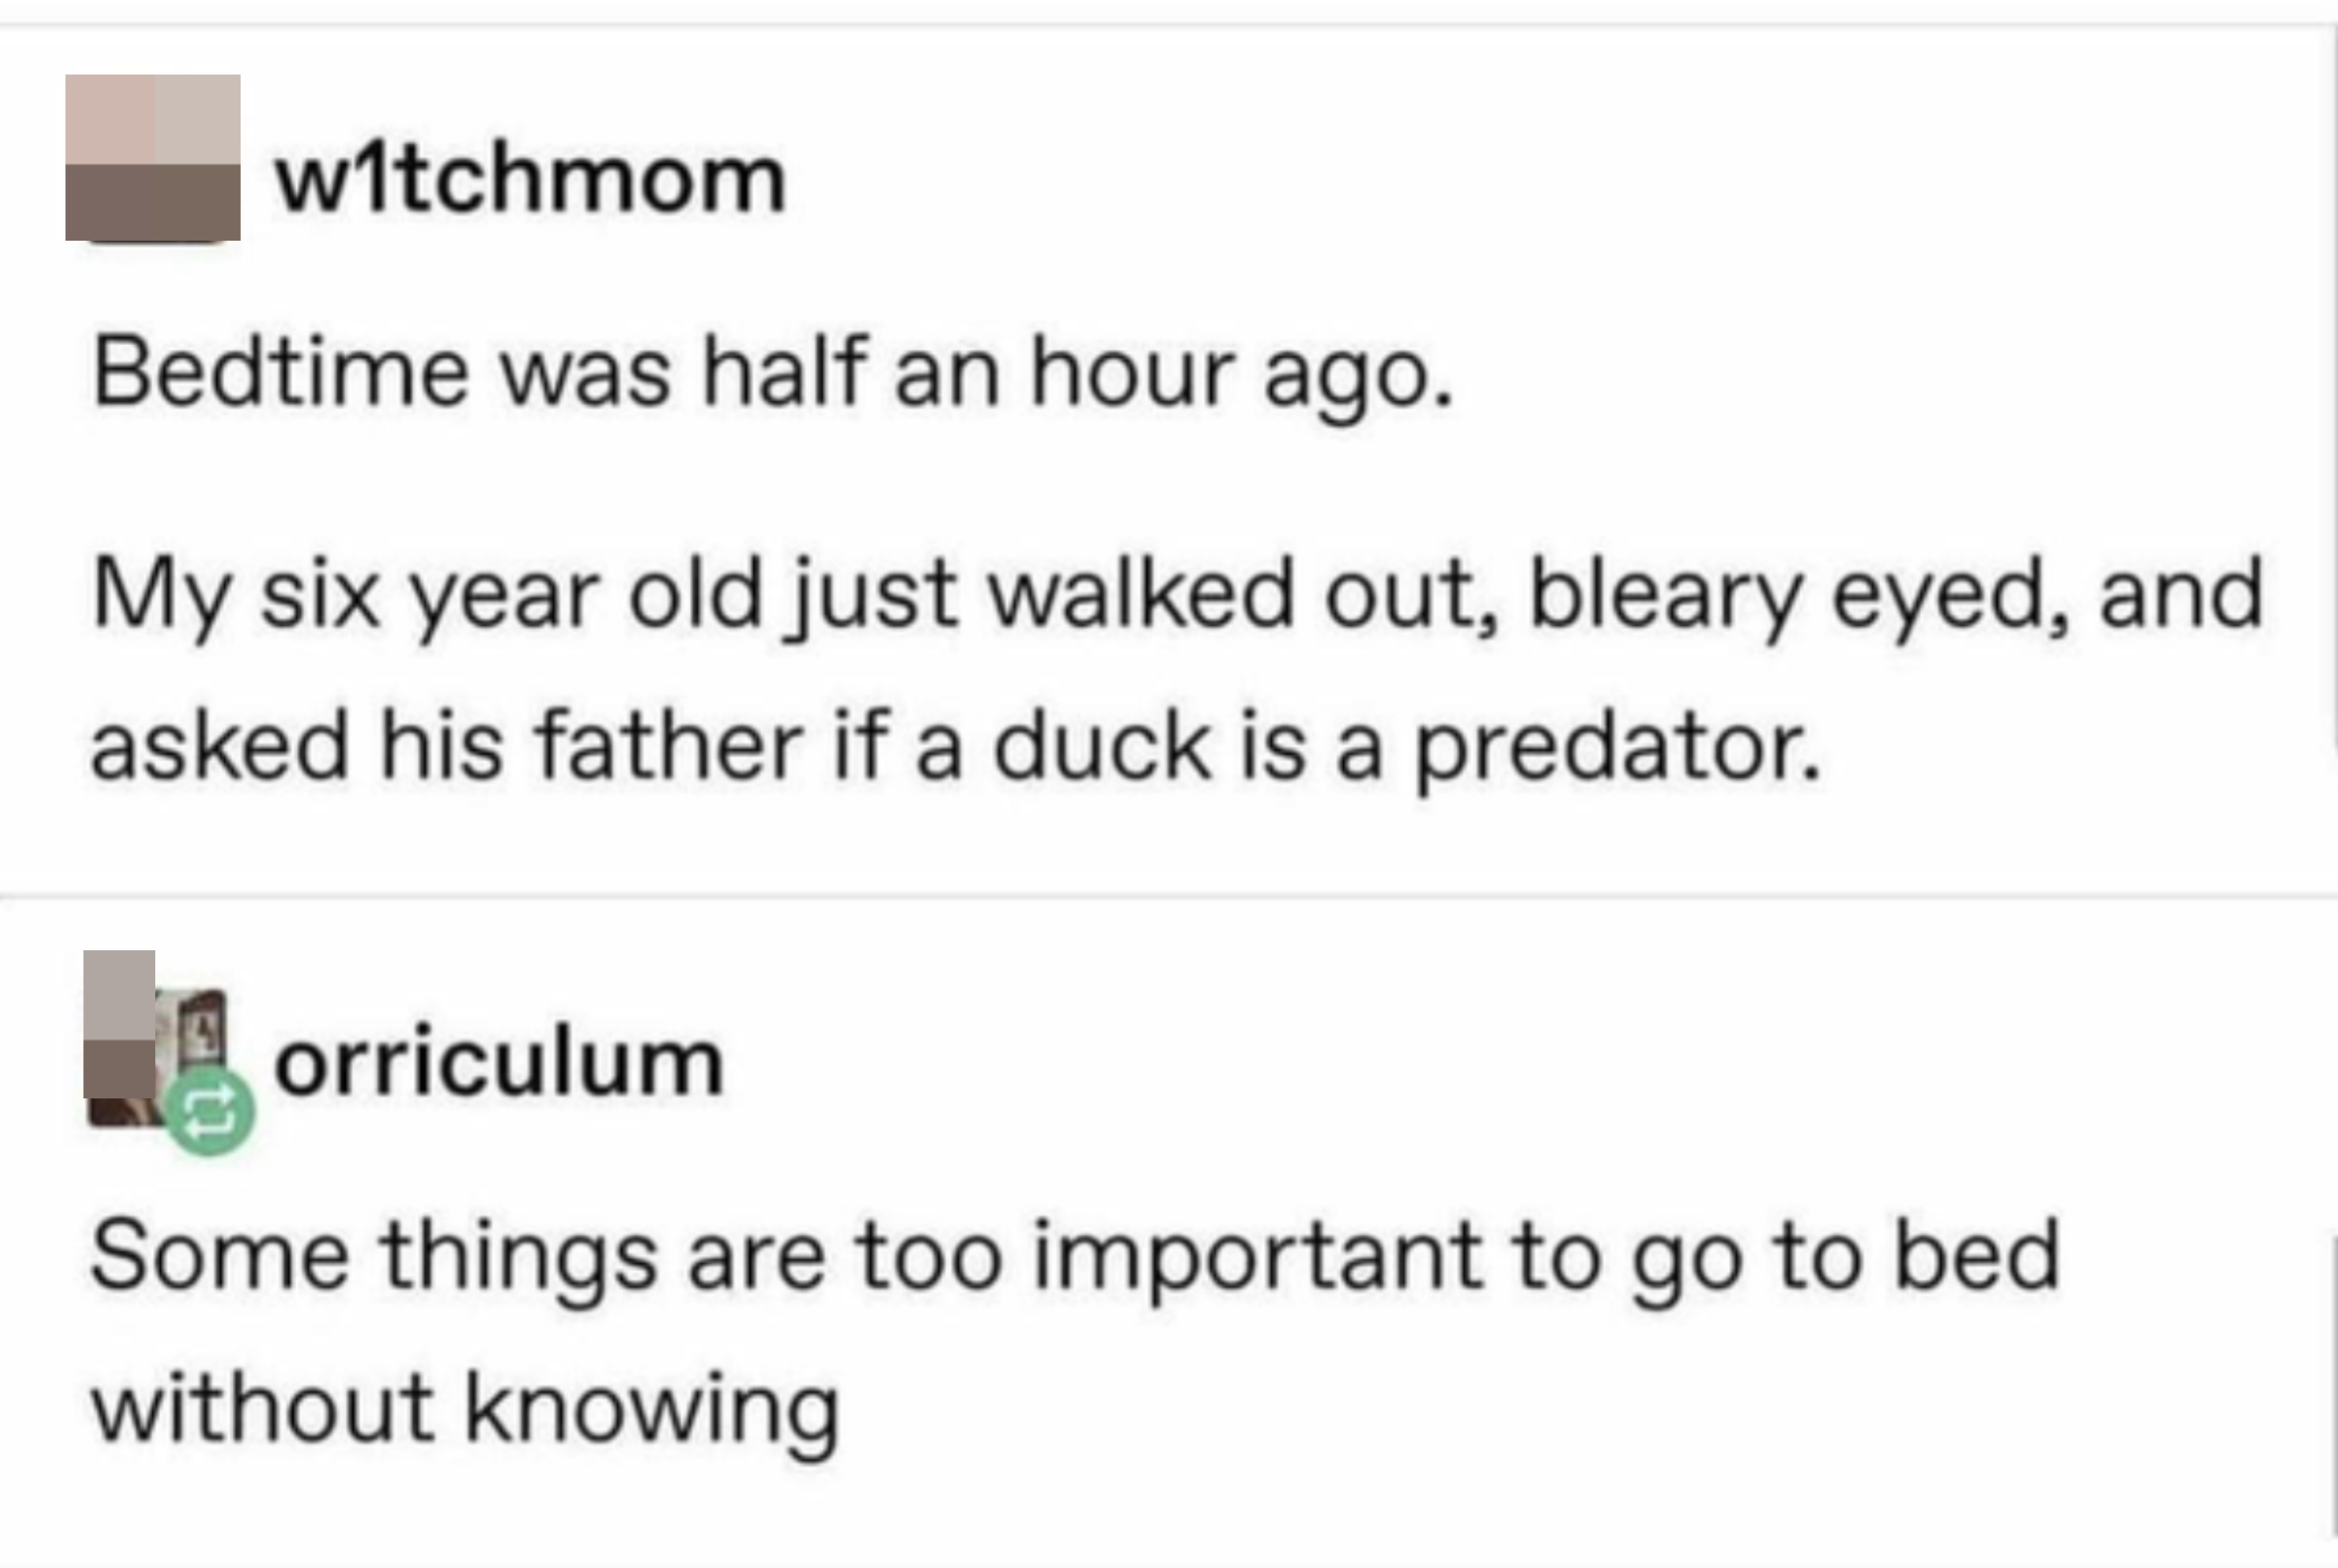 A child gets up after going to bed and asks if a duck is a predator